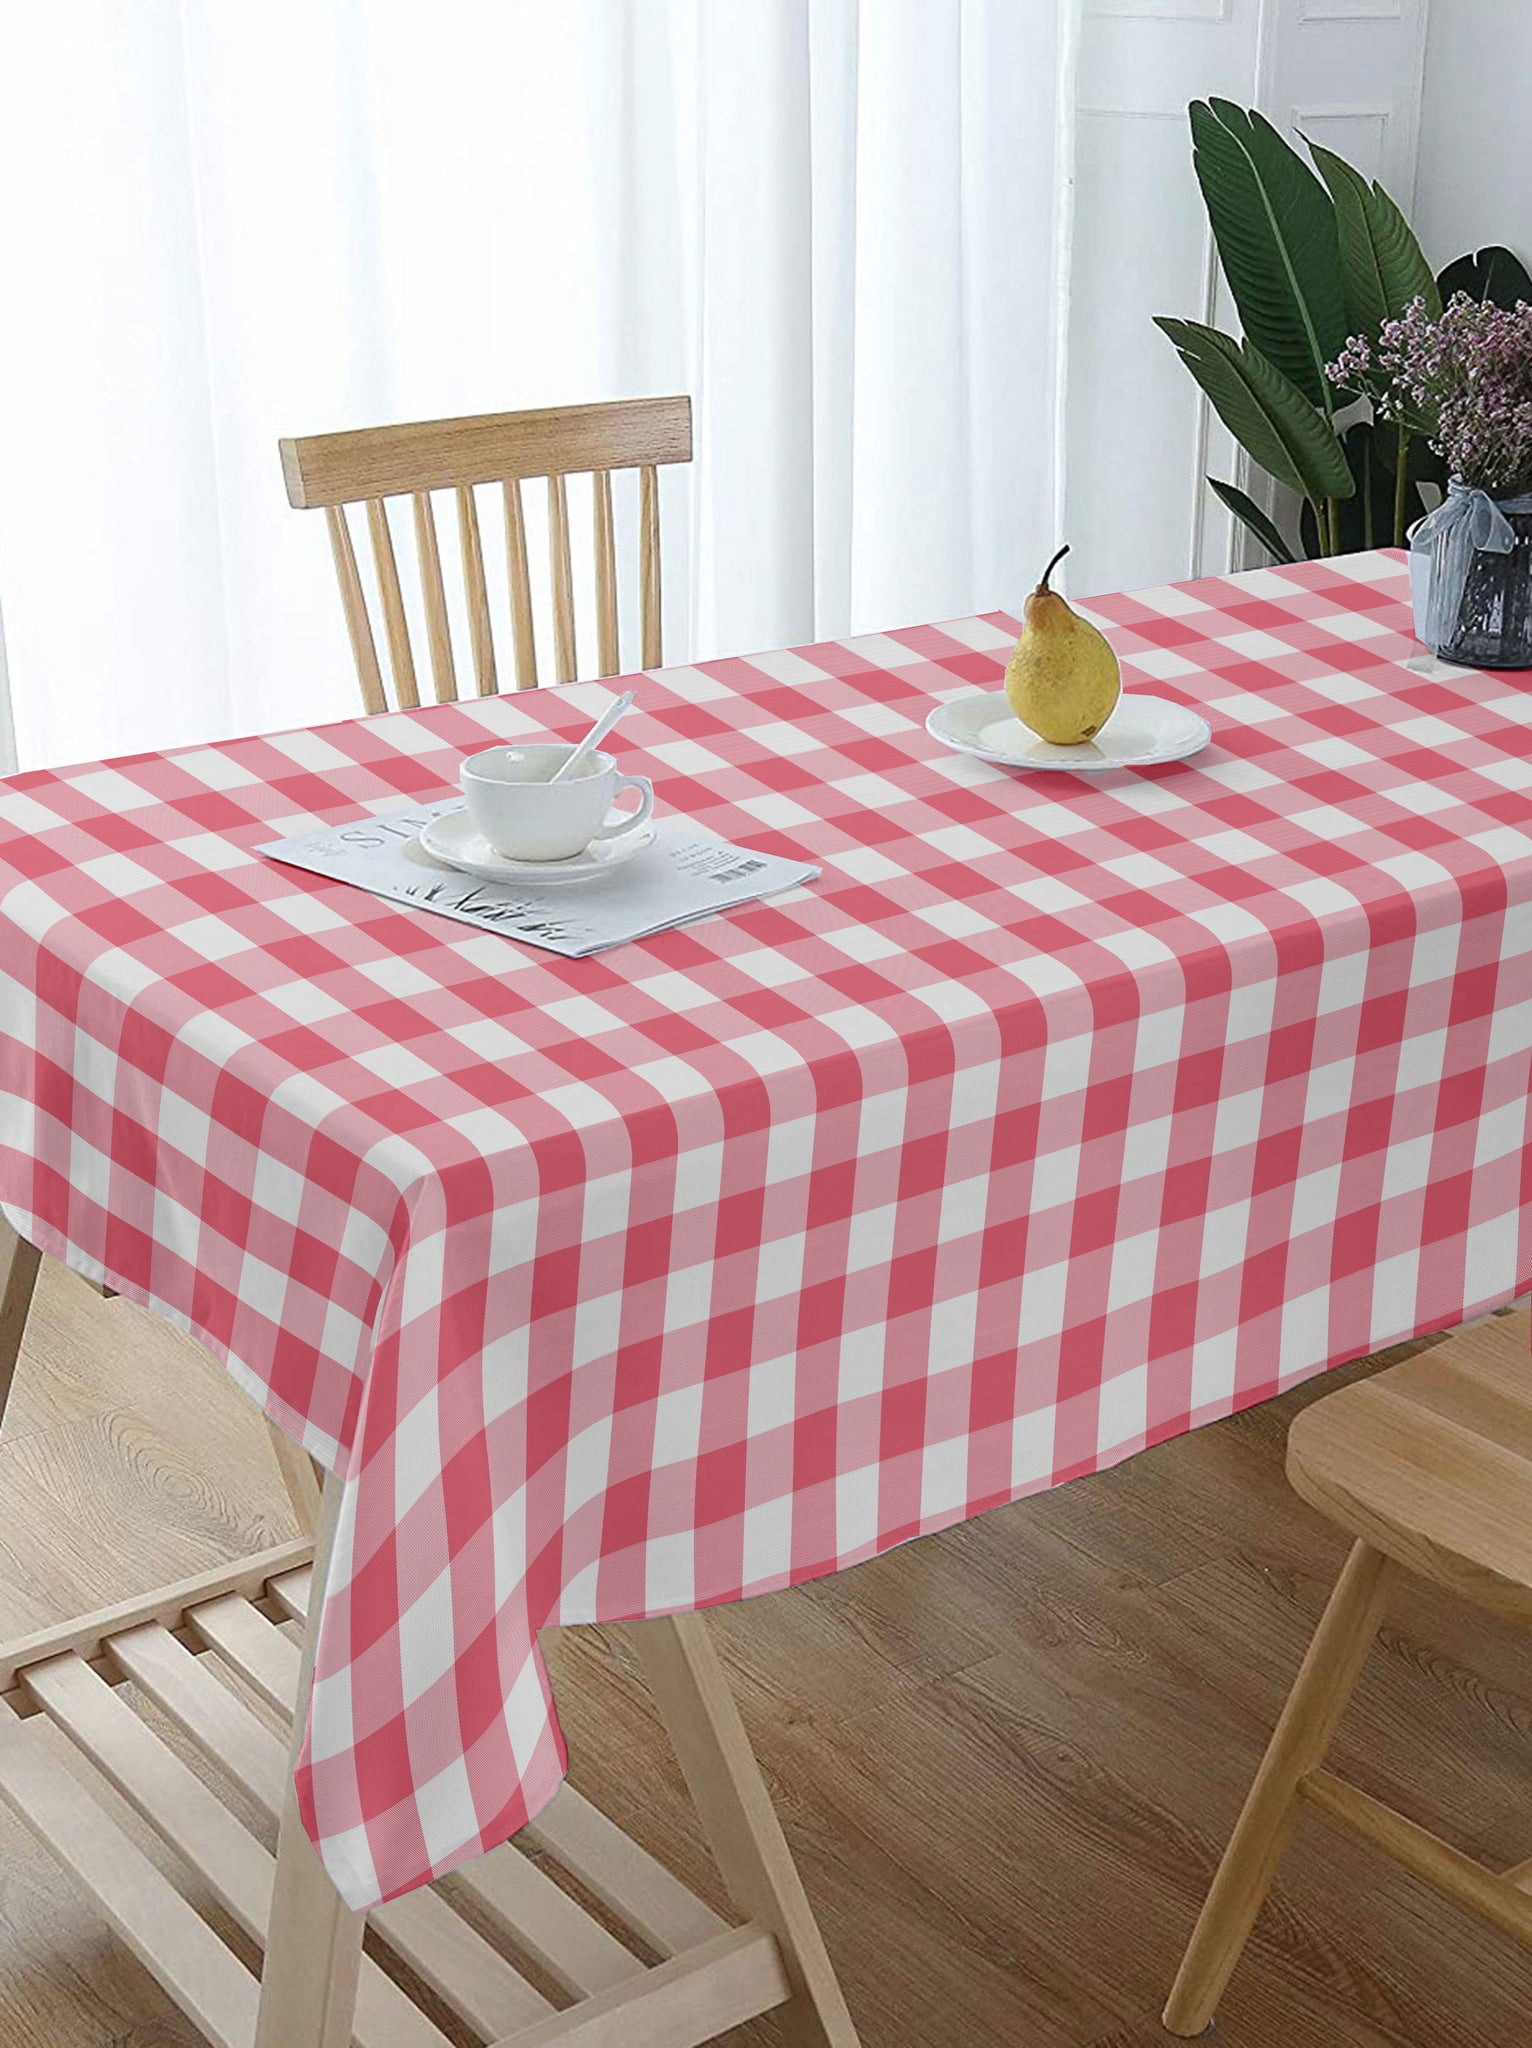 Lushomes table cover, Buffalo Checks Baby Pink Plaid Dining Table Cover Cloth, home decor items (Size 36 x 60 Inches , Center Table Cloth)